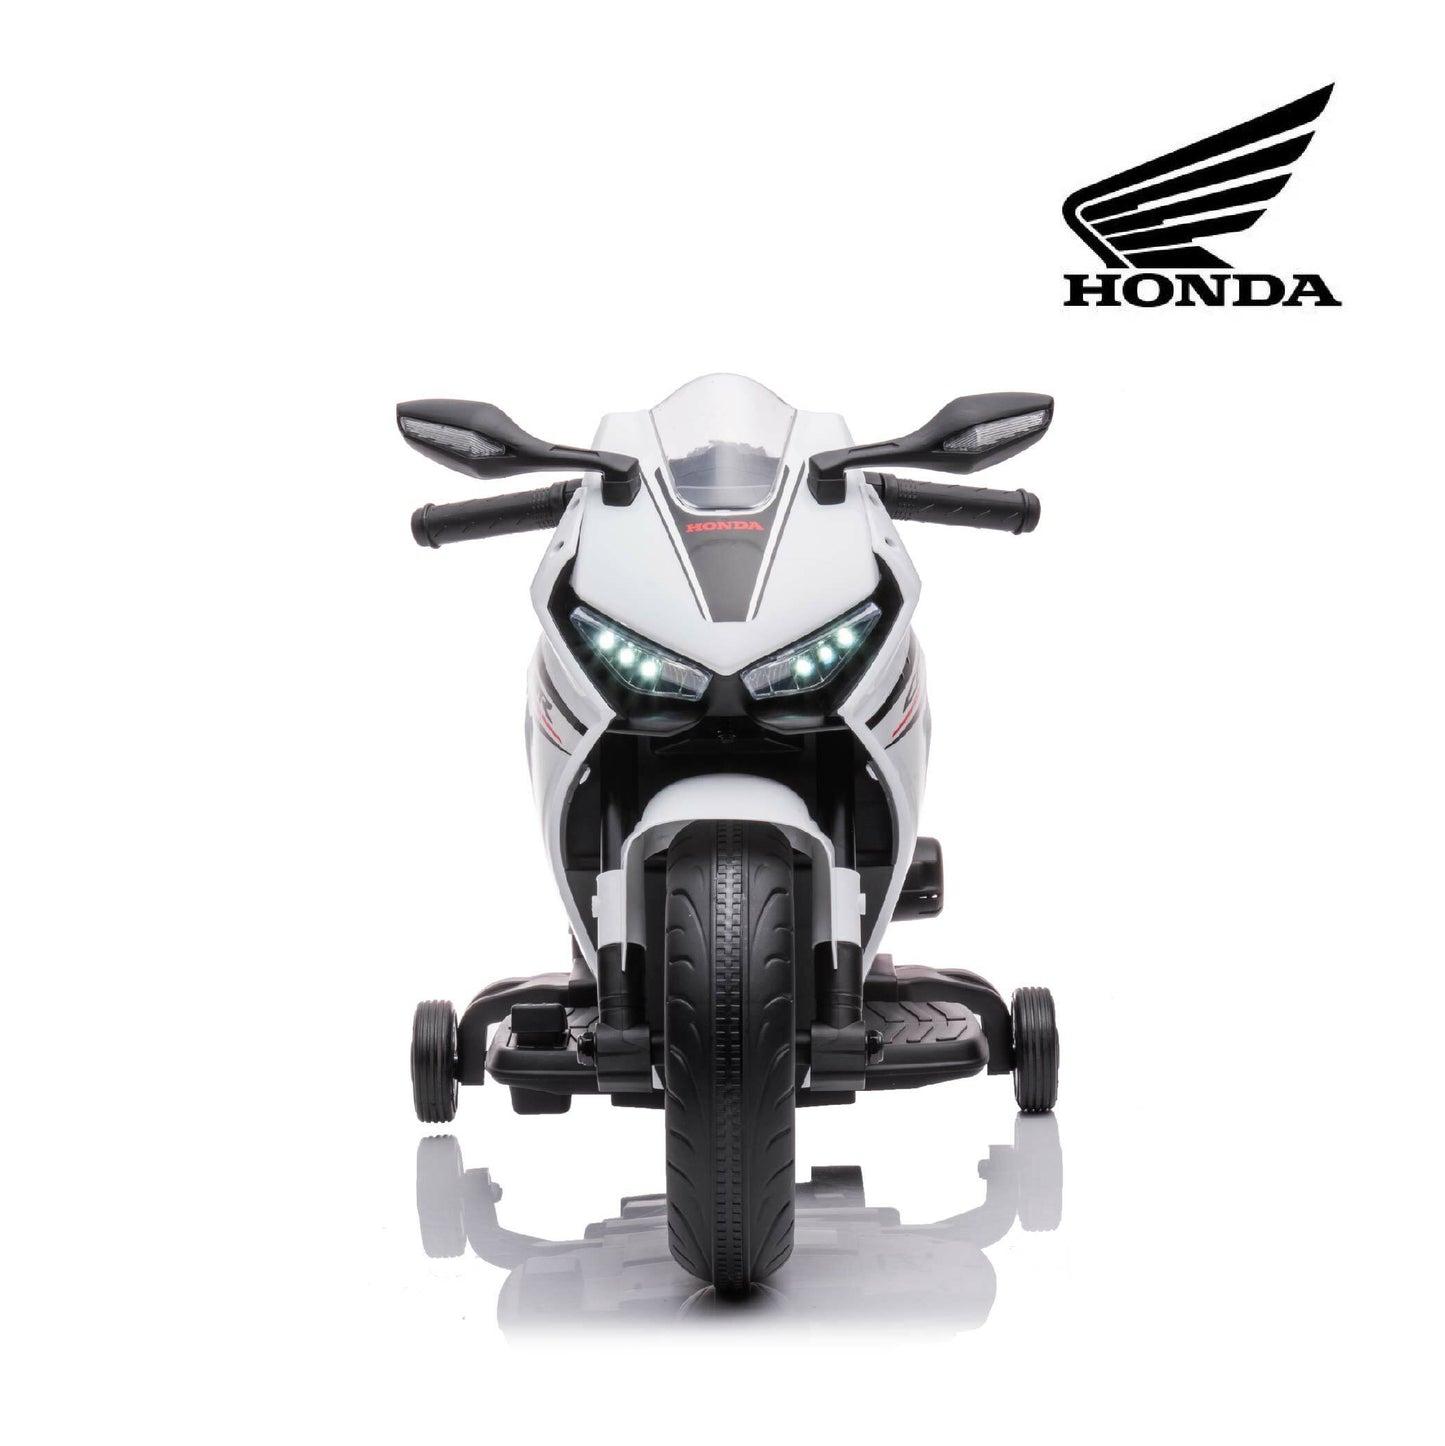 【HONDA】CBR1000RR electric toy car - 2 colors available